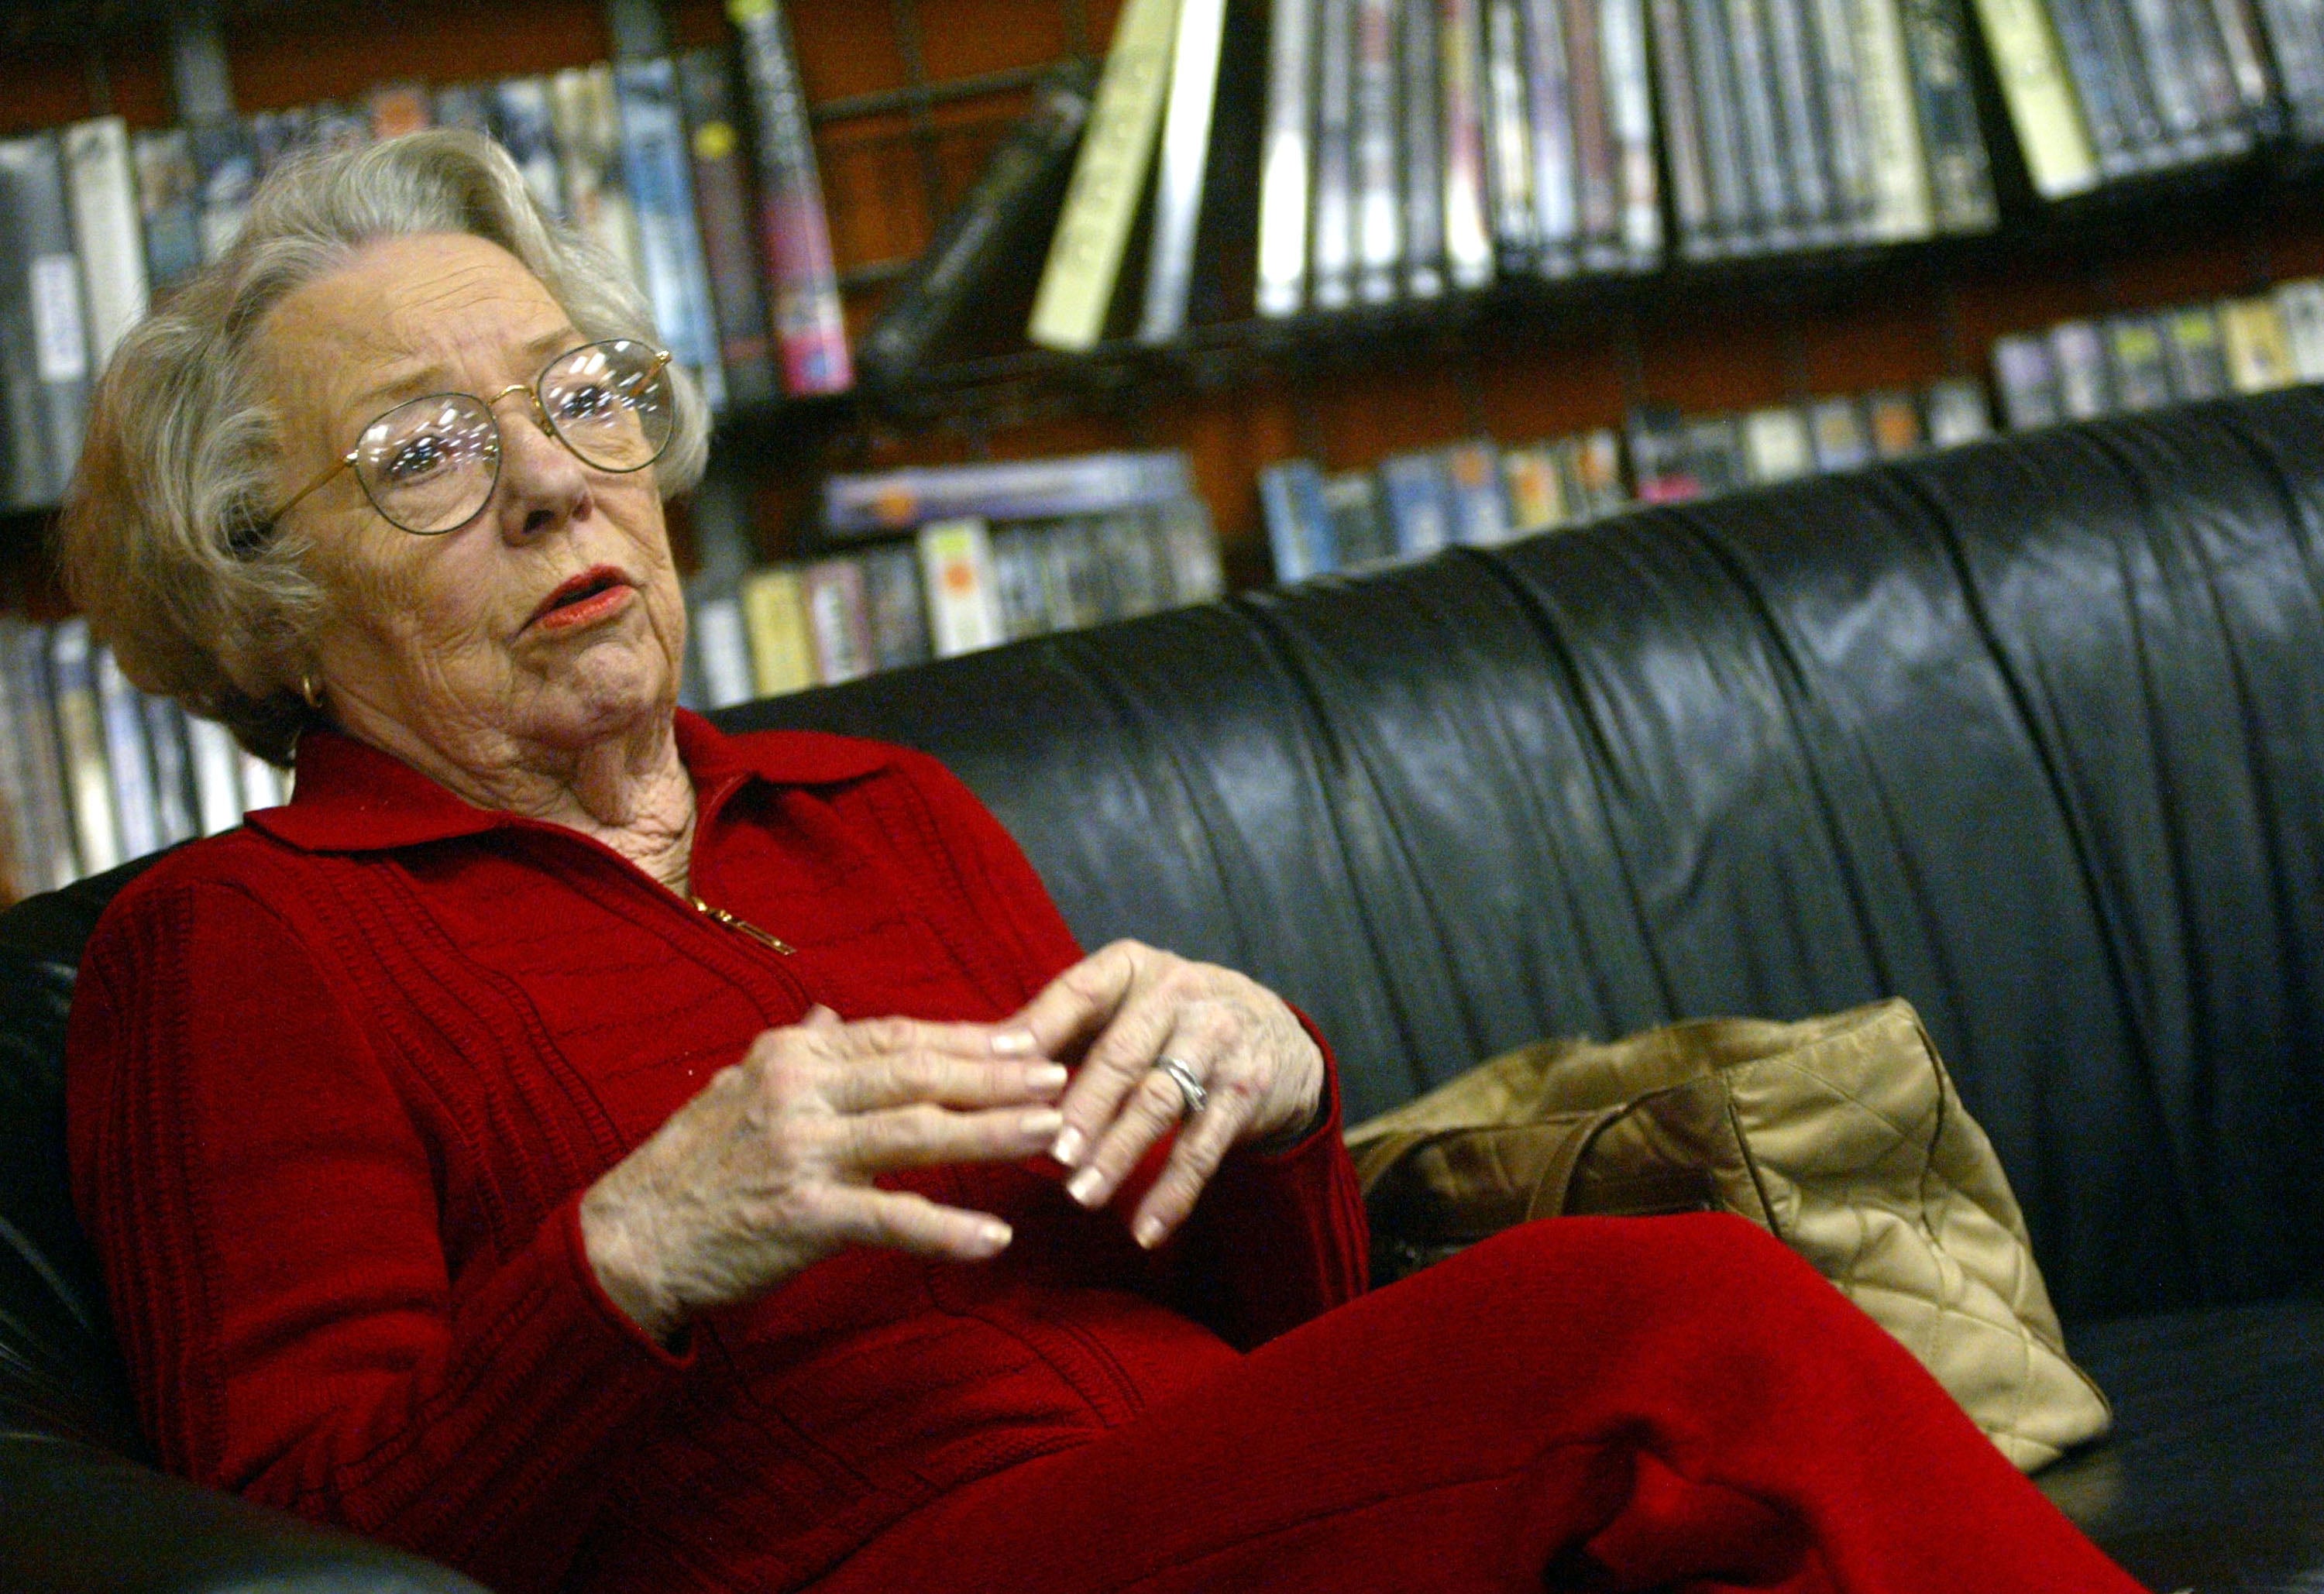 File image: Patricia Hitchcock speaks to fans of Alfred Hitchcock during a DVD signing at Rocket Video in 2005